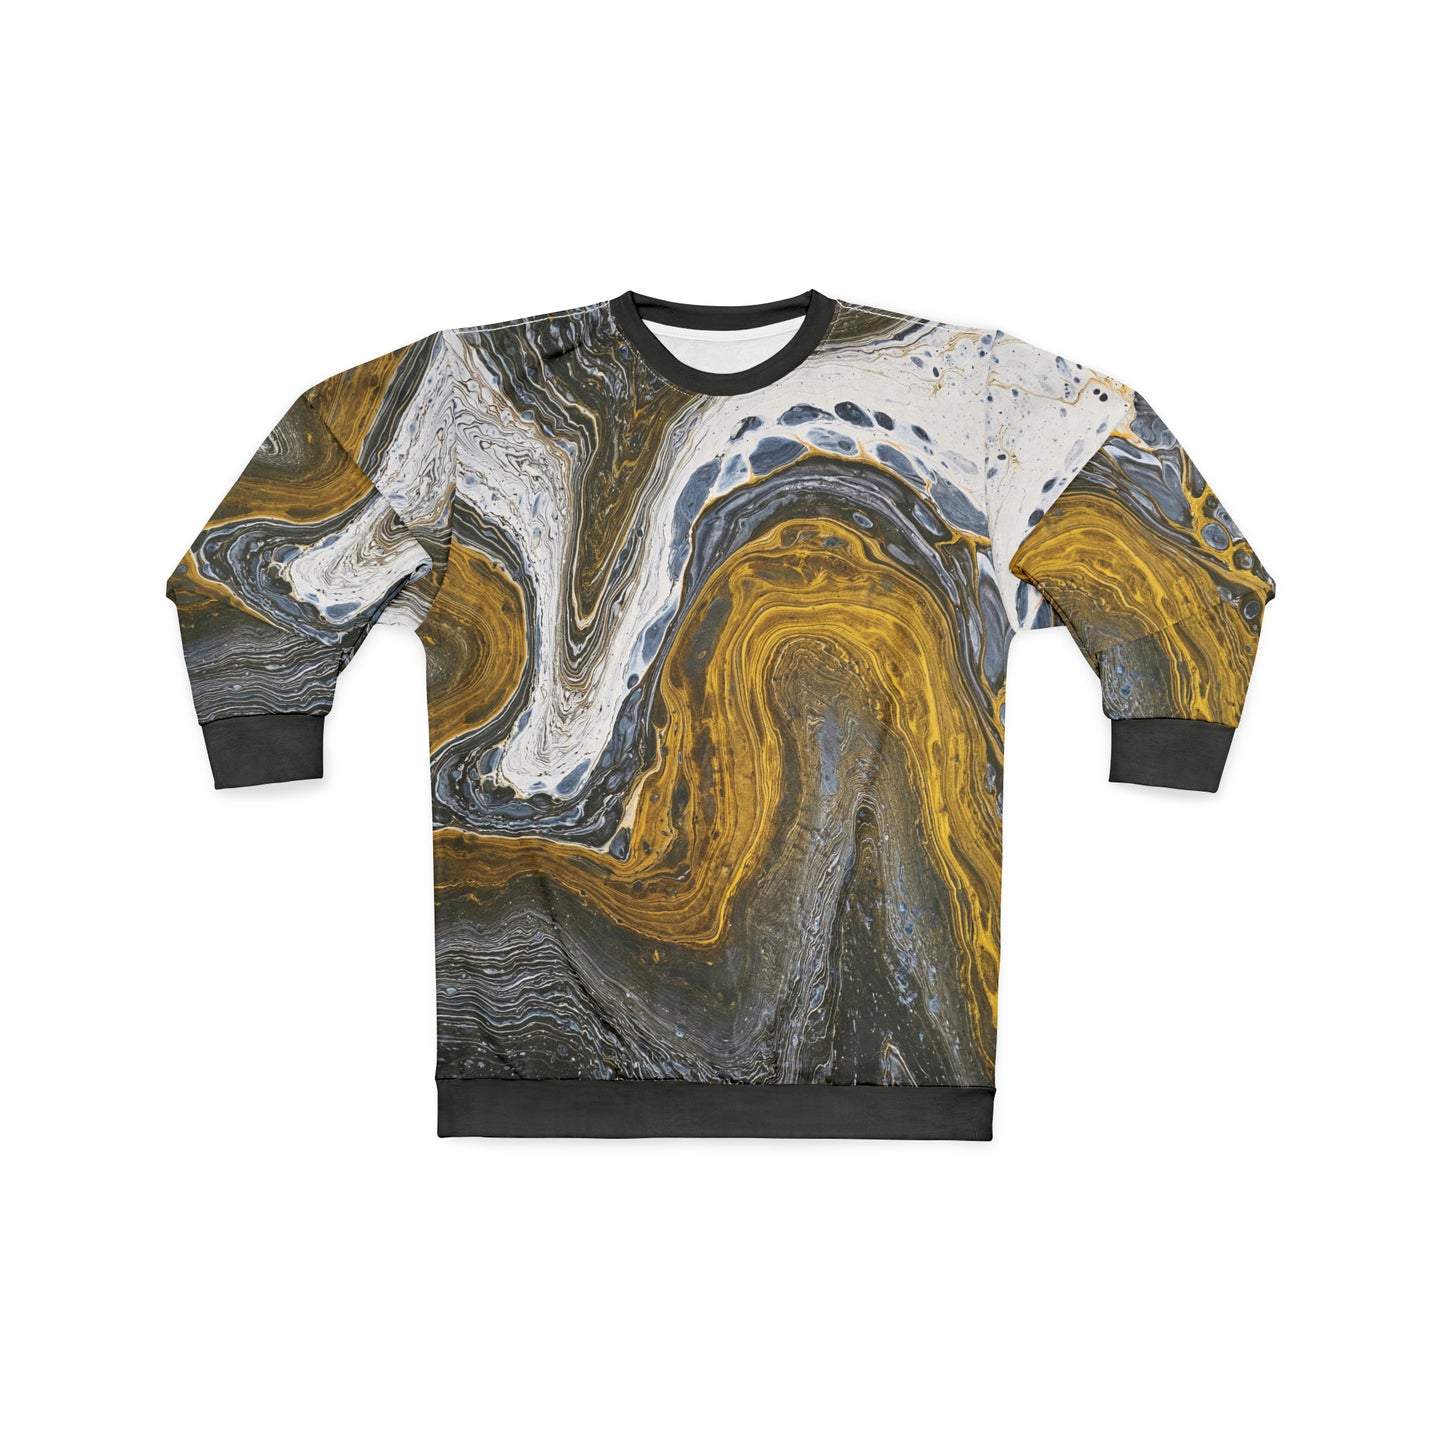 Laced with Gold: All-Over Print Unisex Sweatshirt